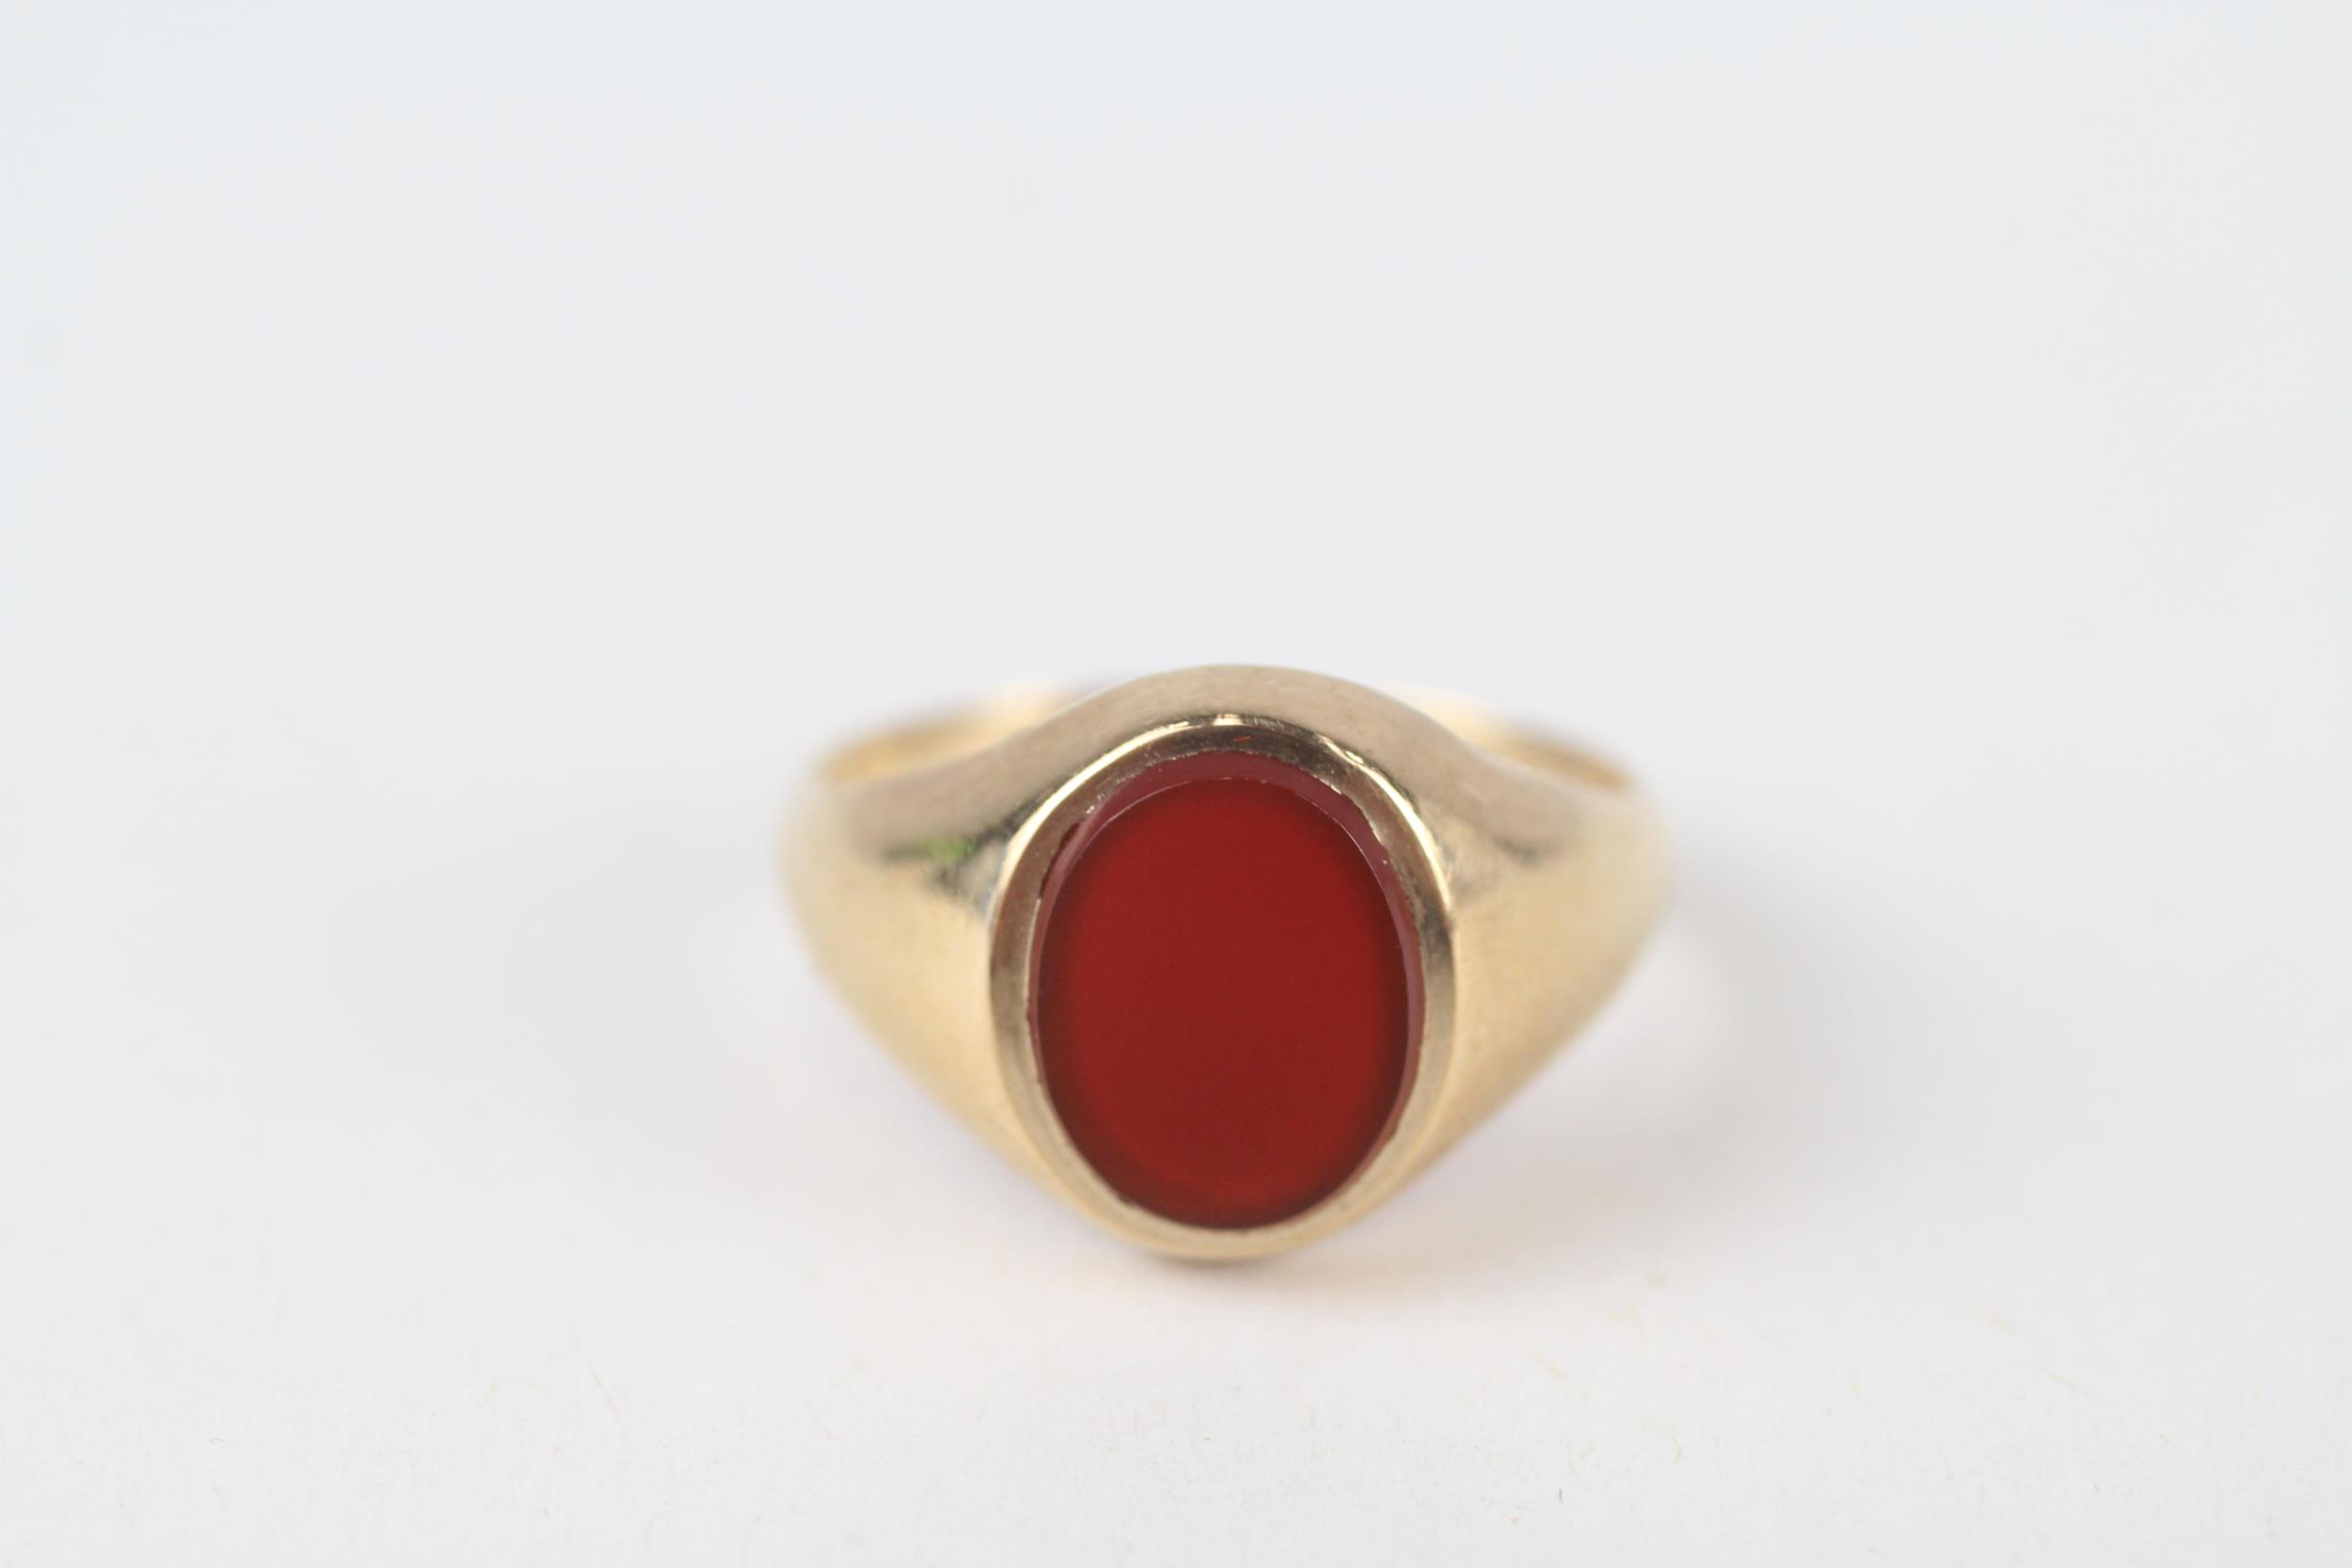 9ct oval carnelian signet ring Size K 2.8 g - Image 6 of 9